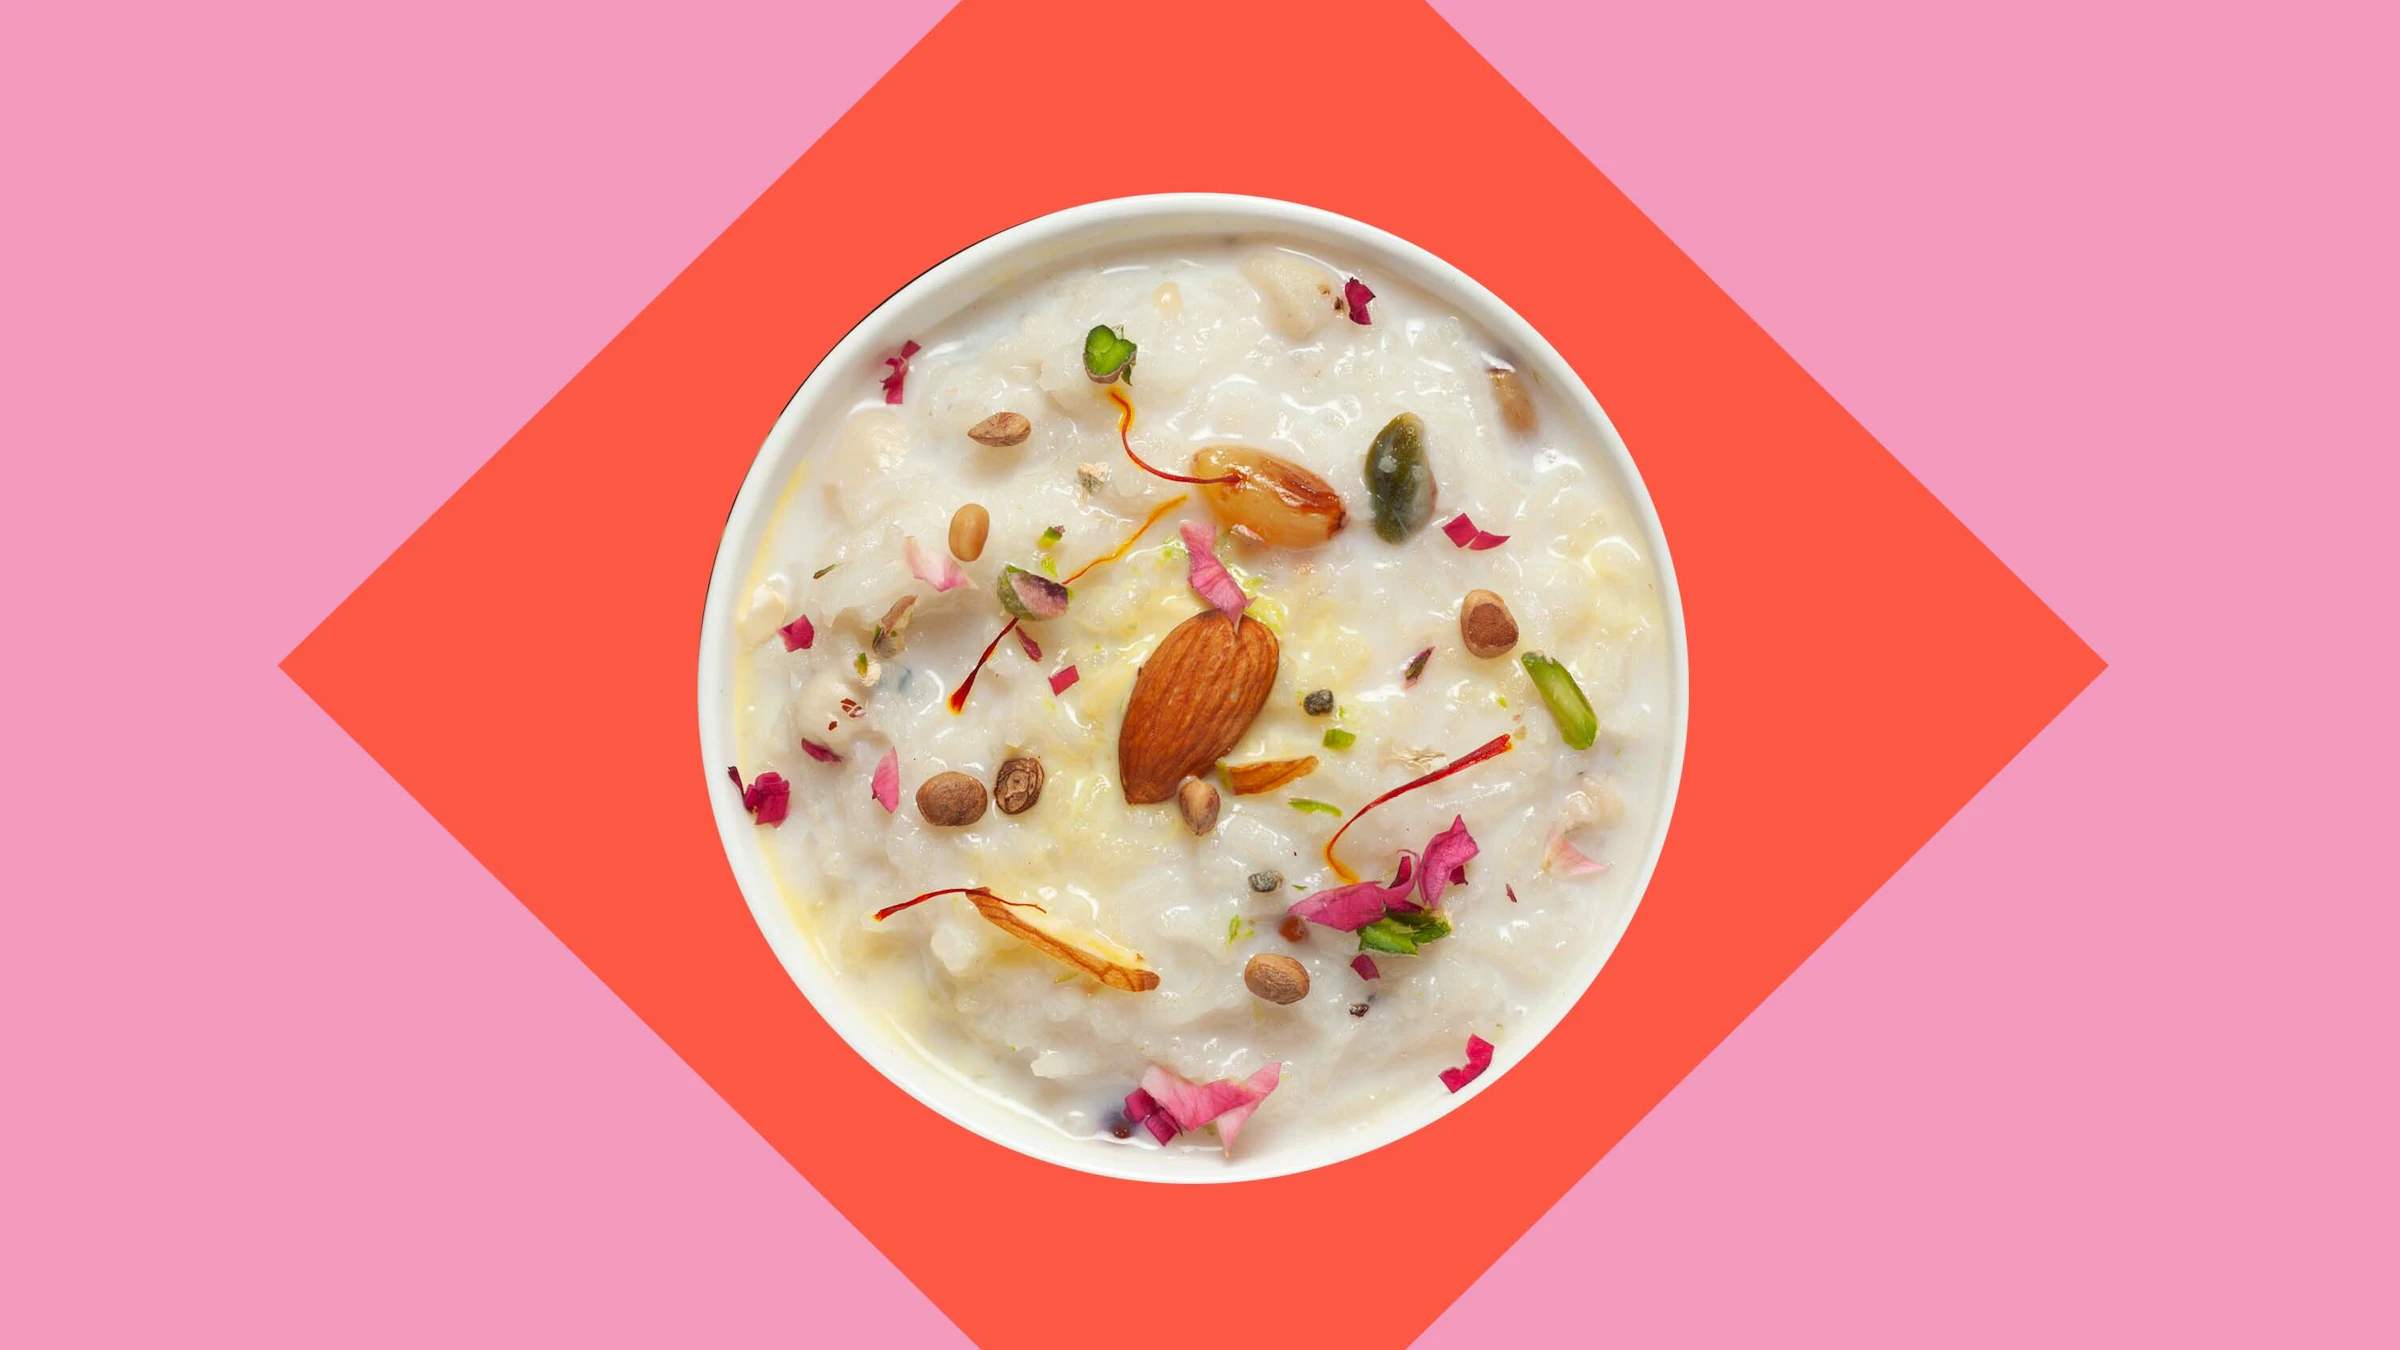 Bowl of rose rice pudding on pink background communal living recipes